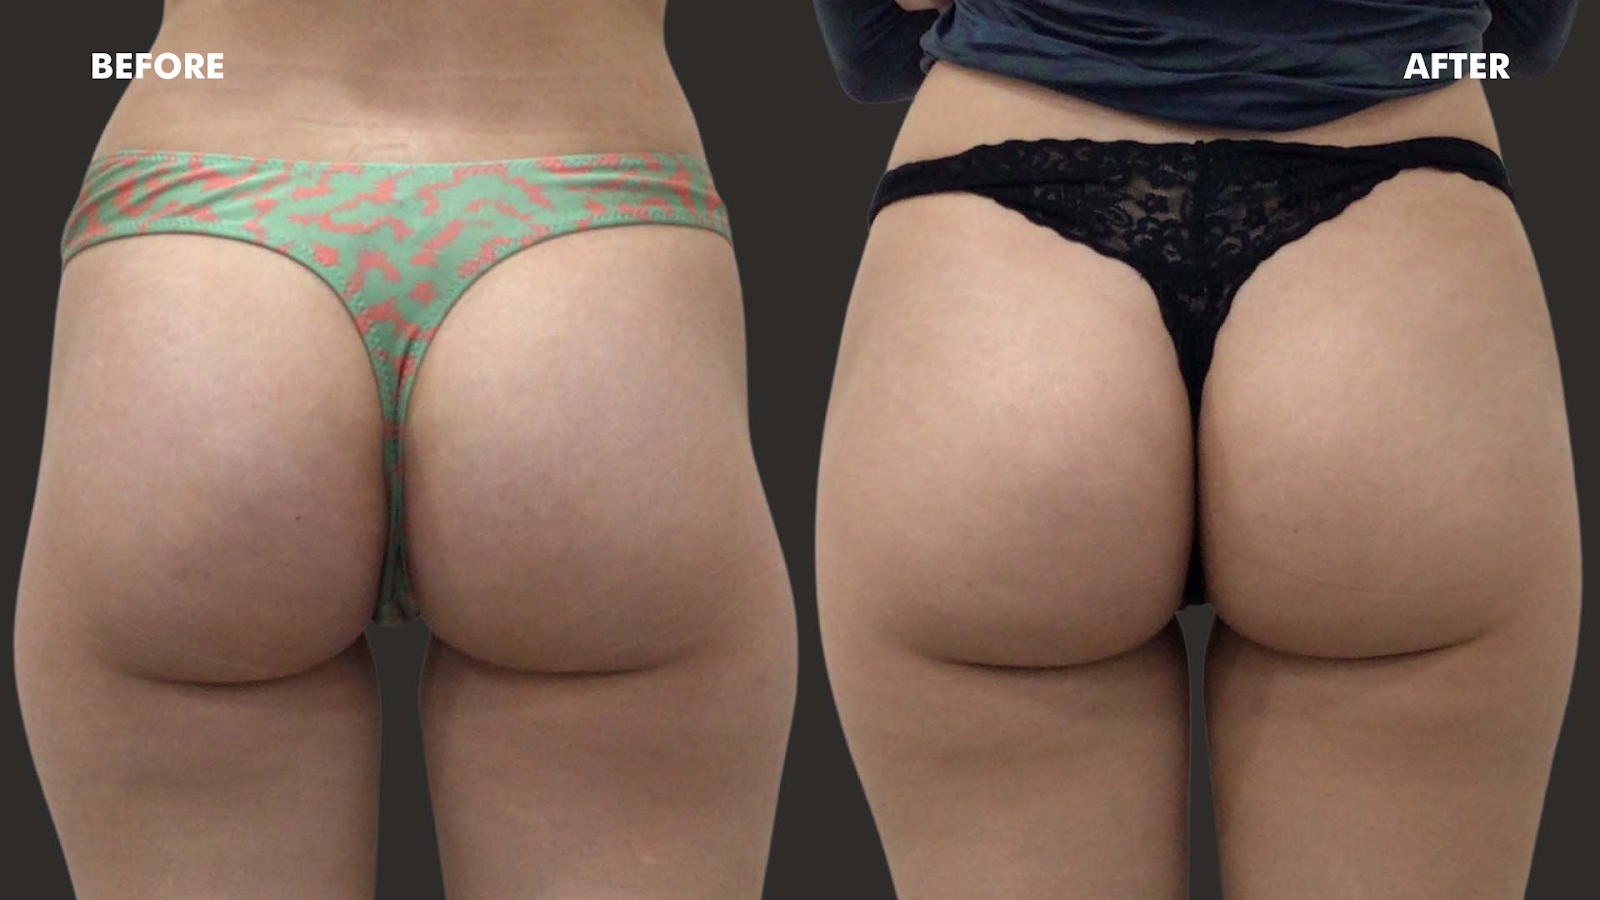 Before and after of buttocks.